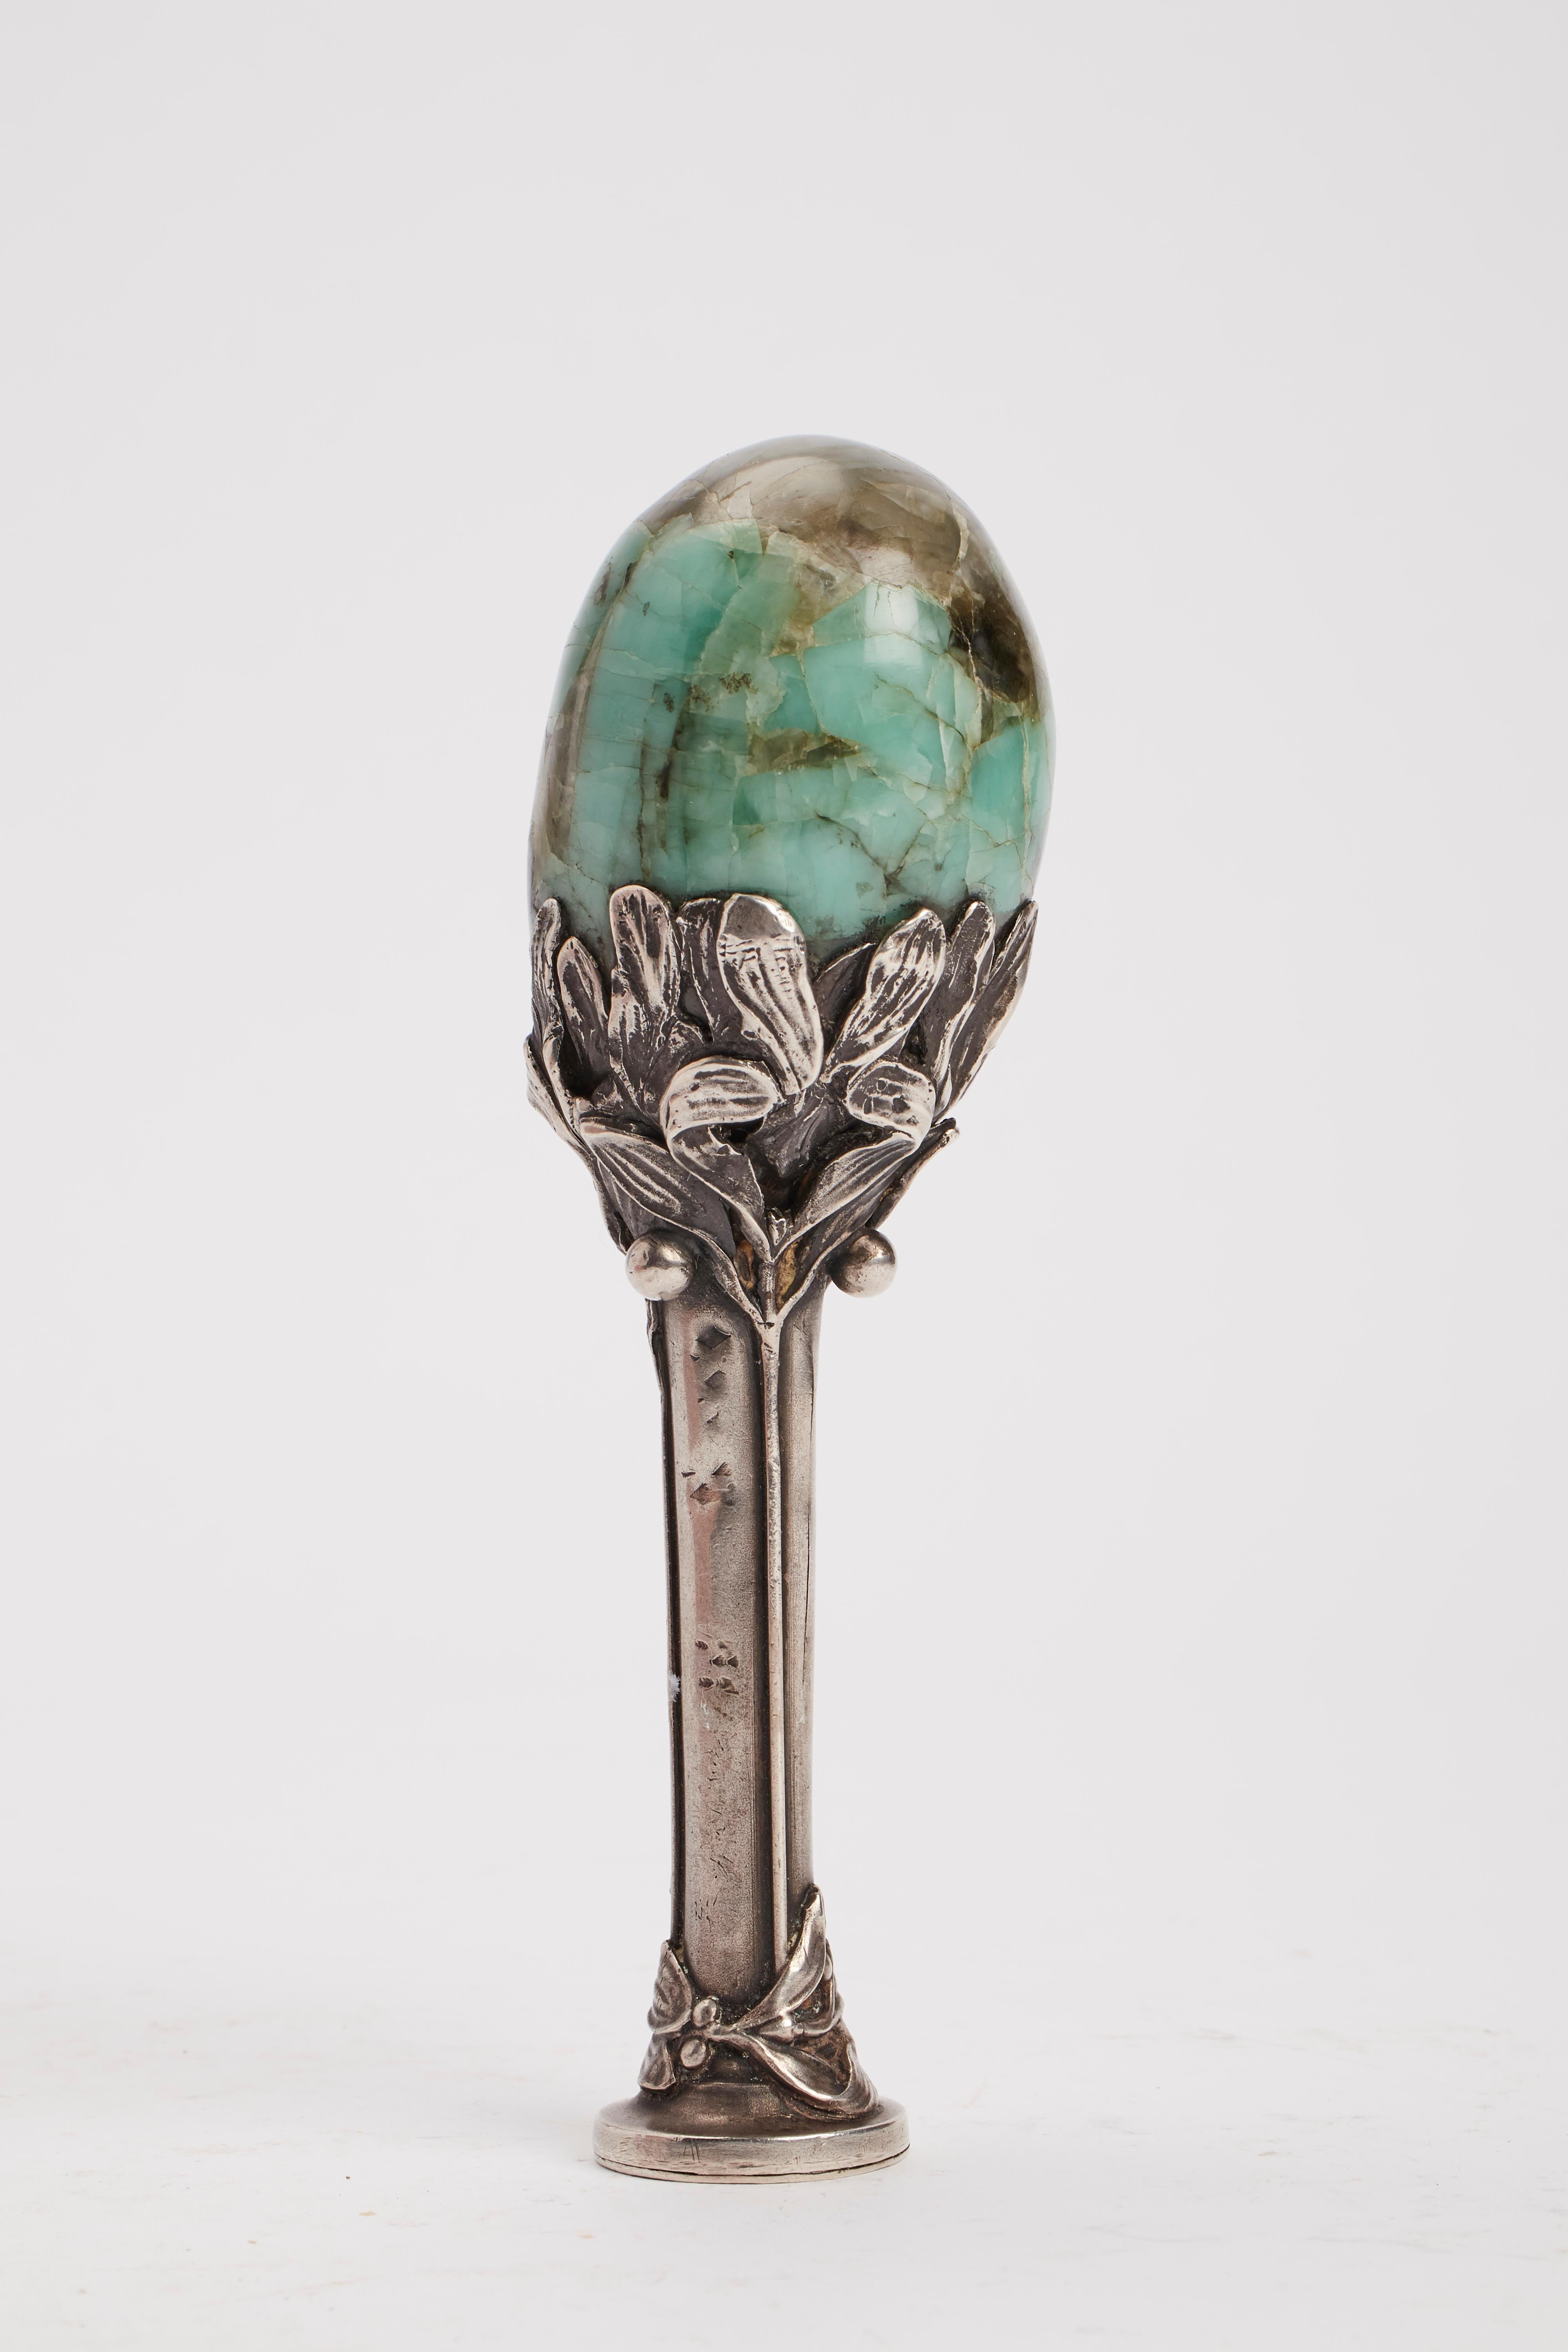 Art Nouveau seal made out of silver depicting mistletoe. The handle made out of semi-precious stone. France, 1900.